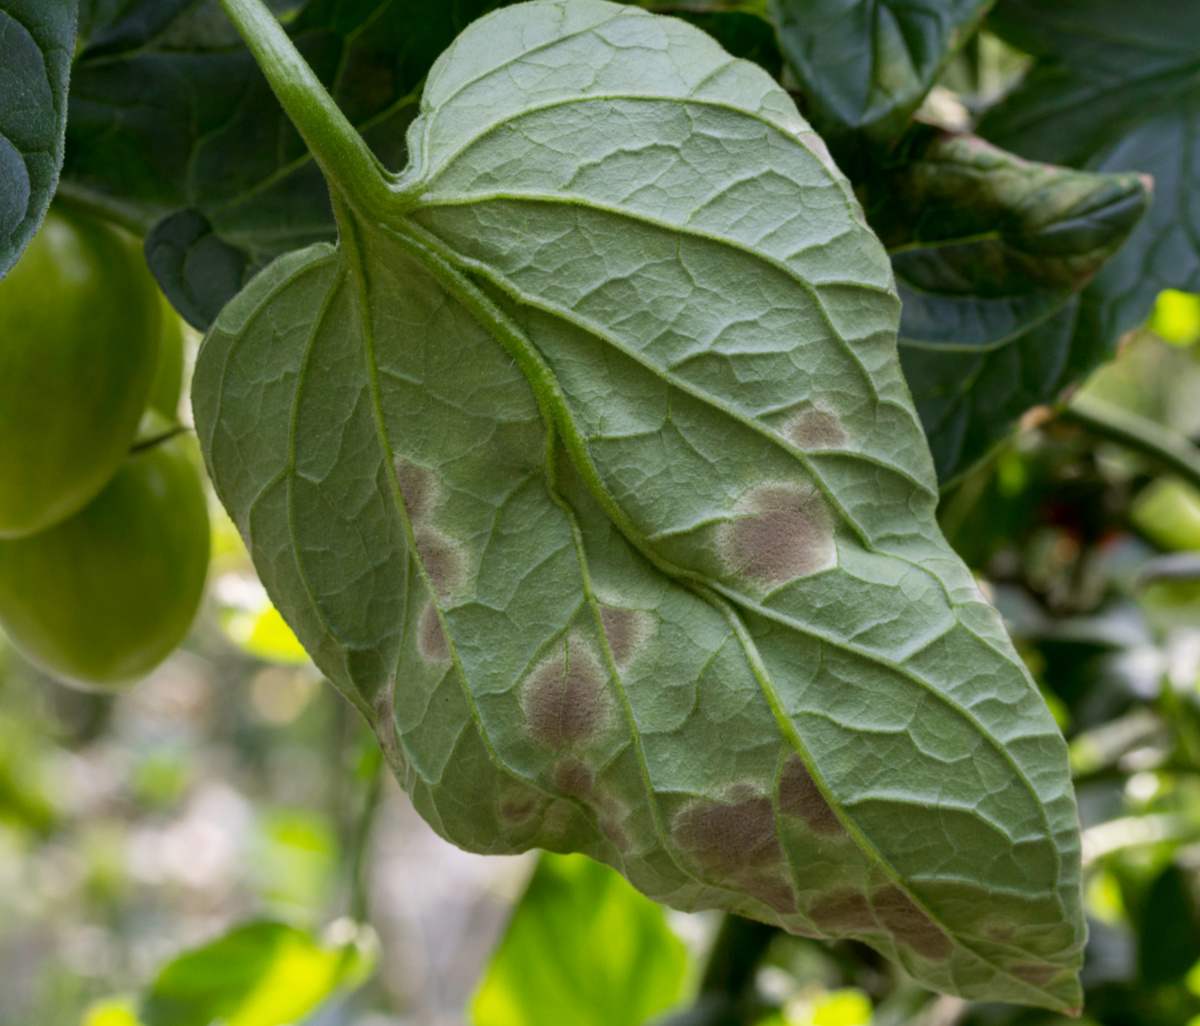 Tomato plant affected by leaf mold.